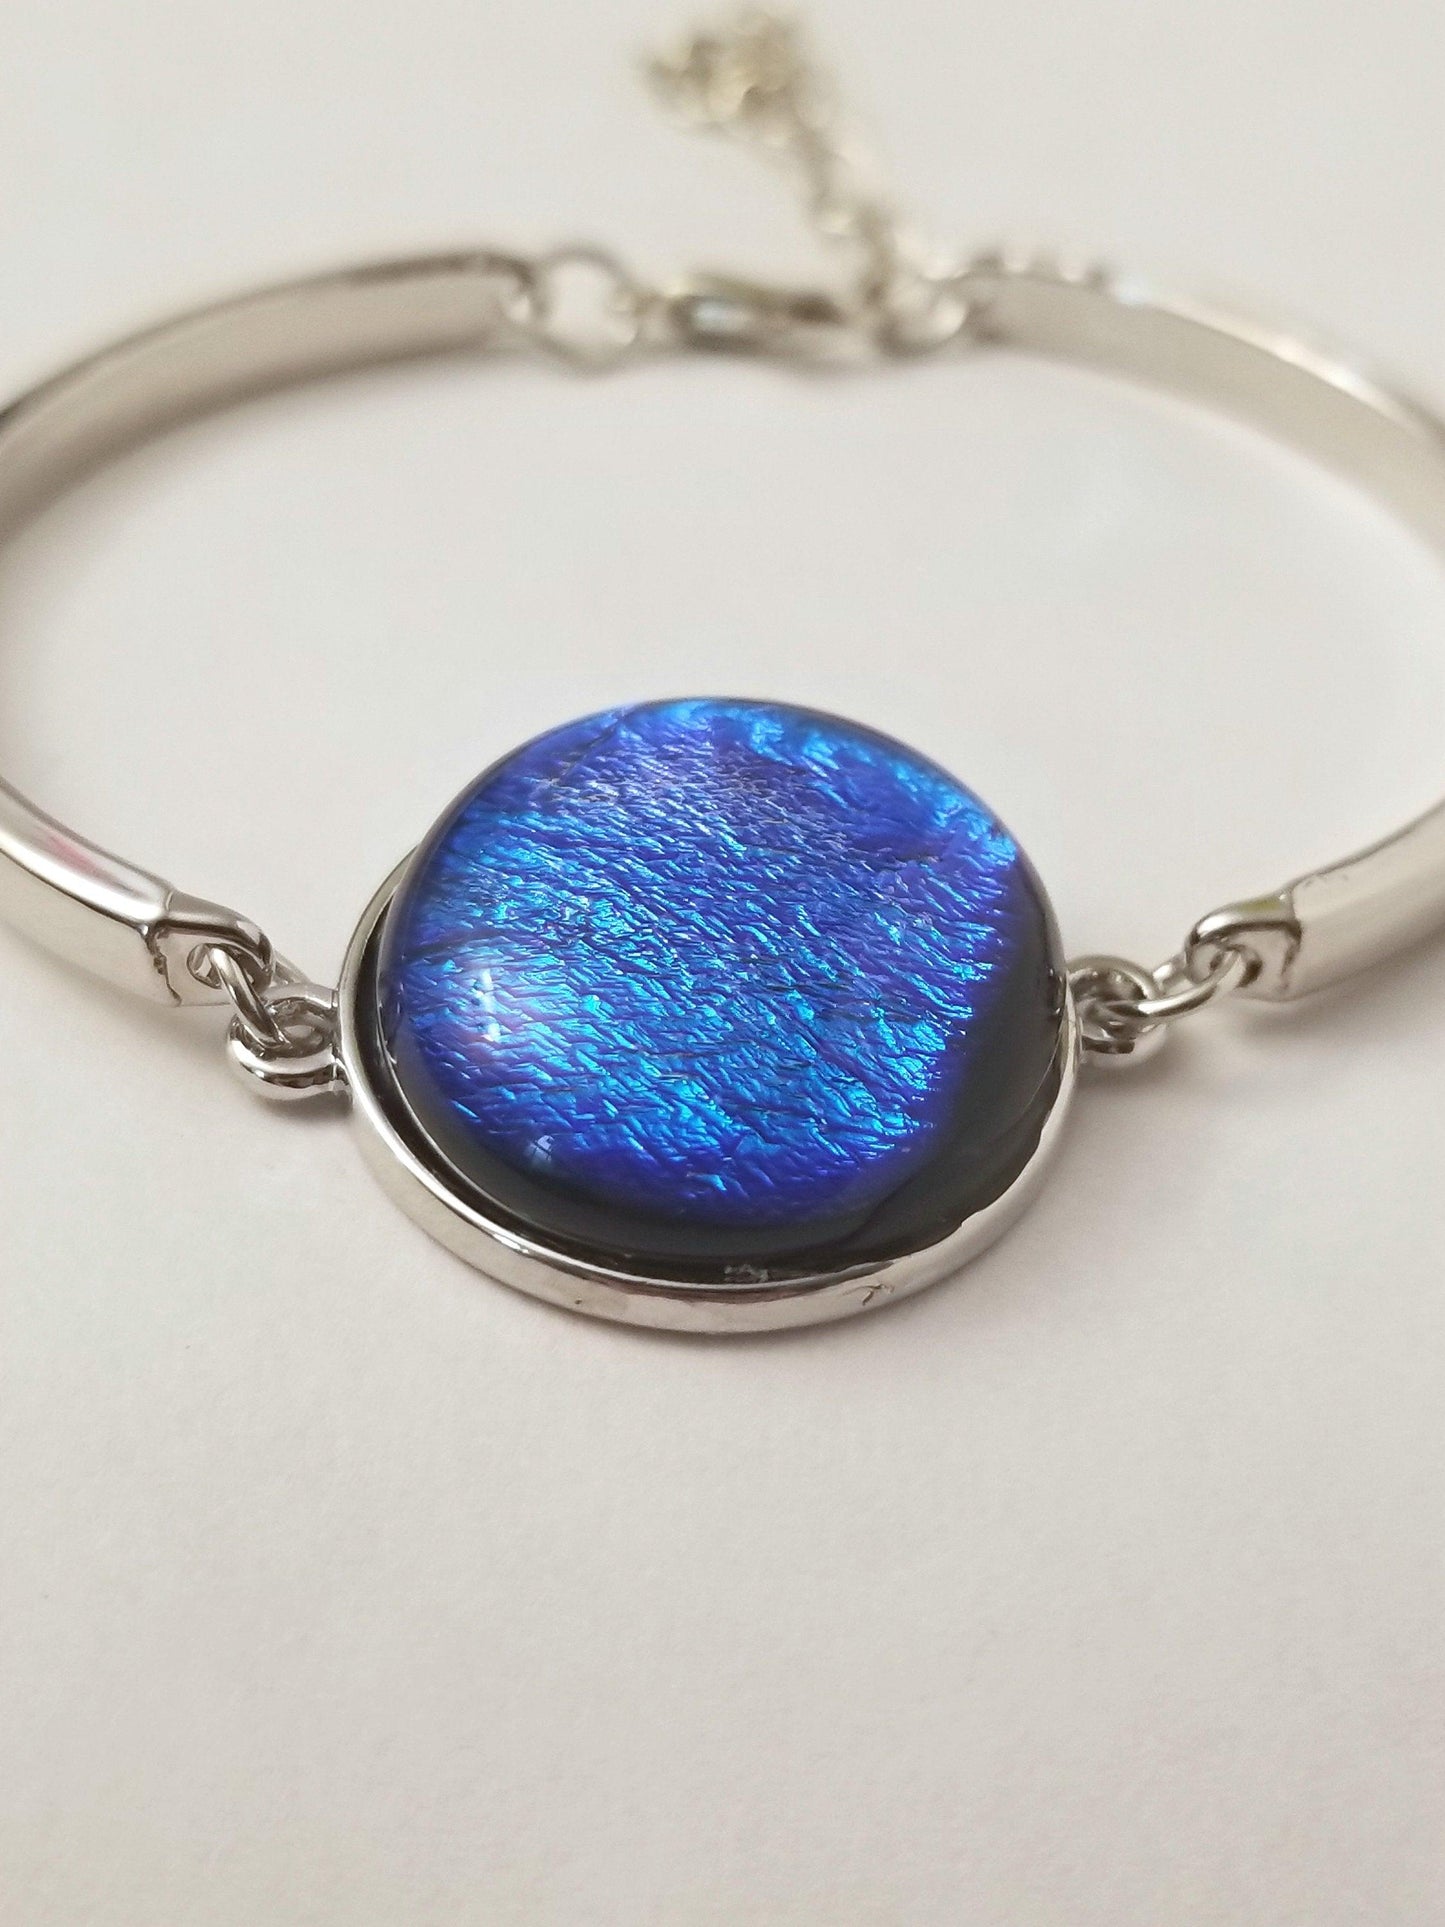 Delicate Adjustable Bracelet,  silver tone with medium Blue Dichroic fused glass cabochon